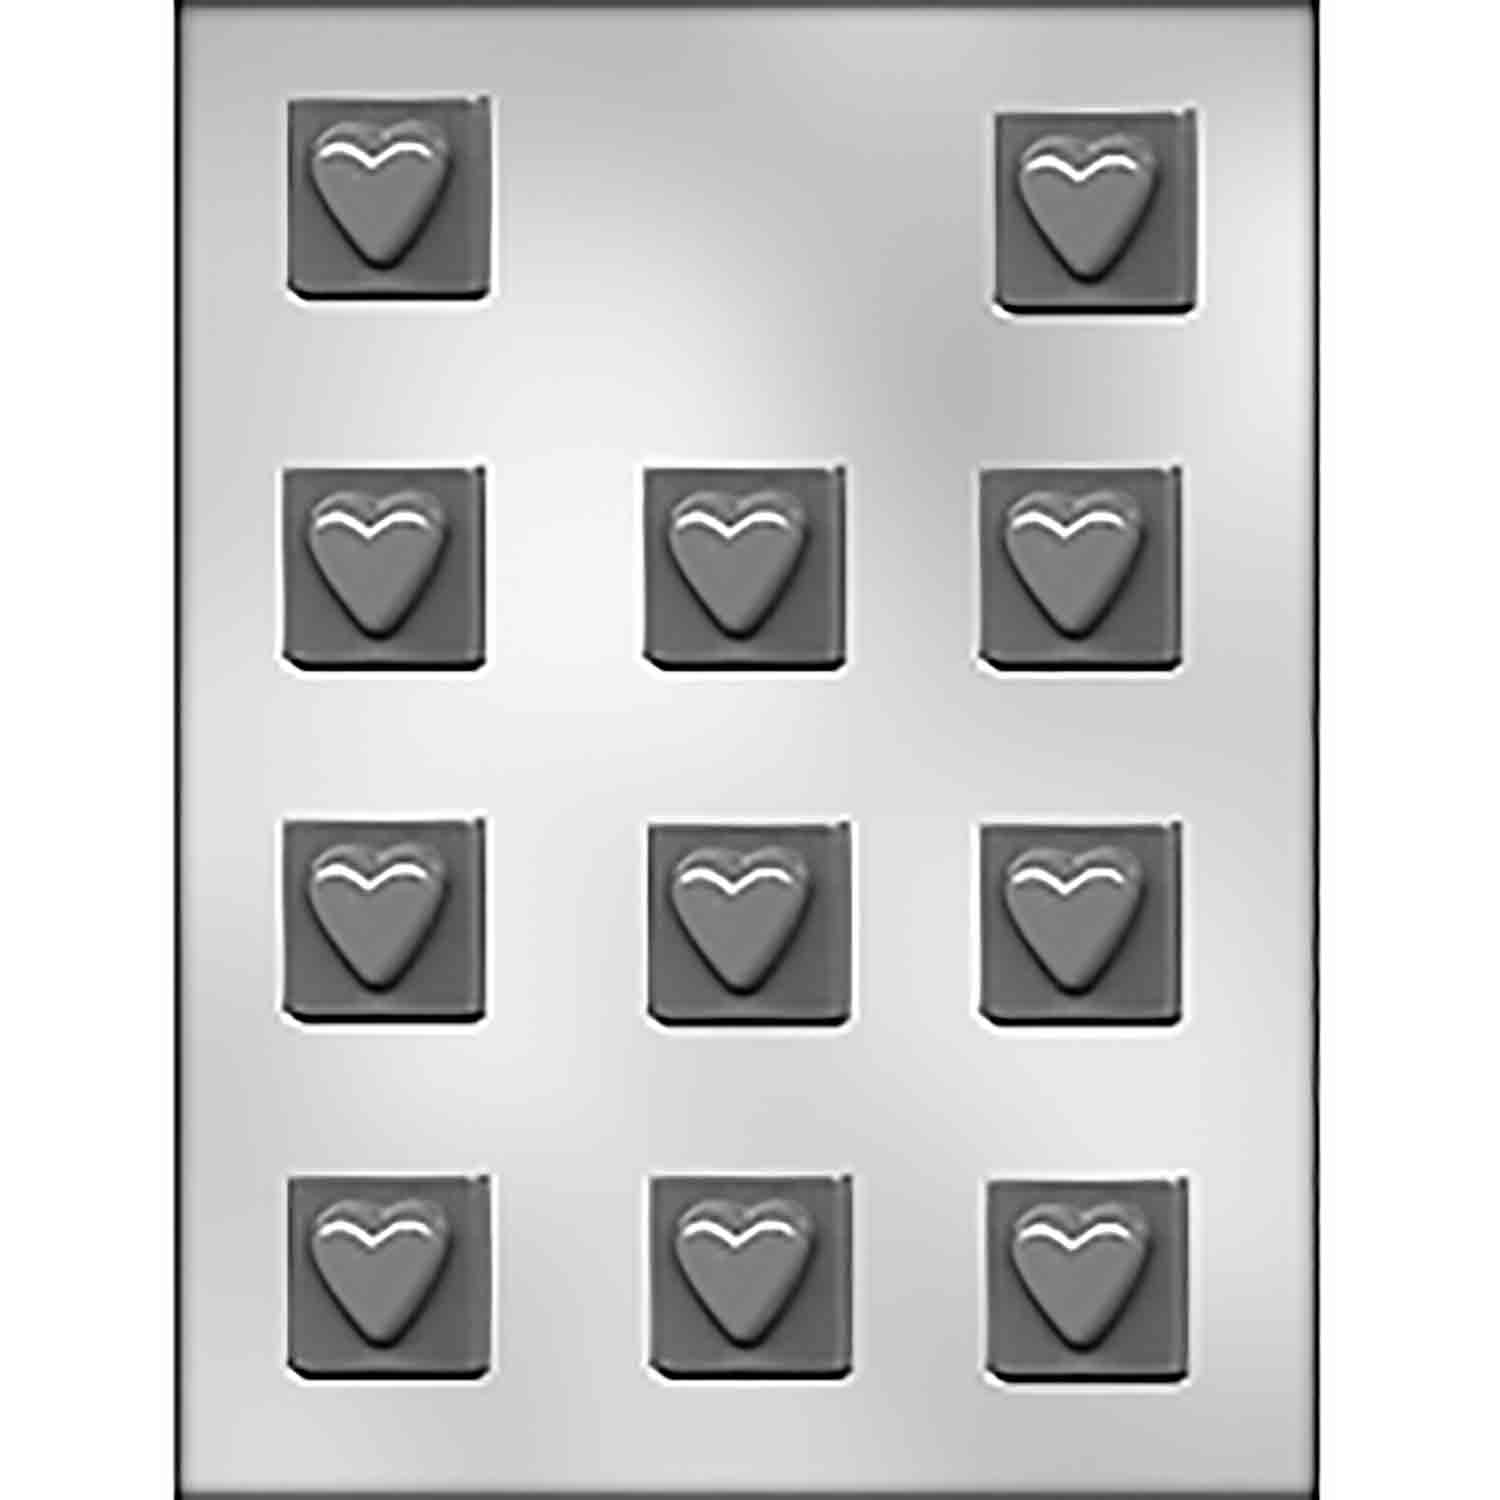 CK Products Heart on 1-1/4-Inch Square Chocolate Mold